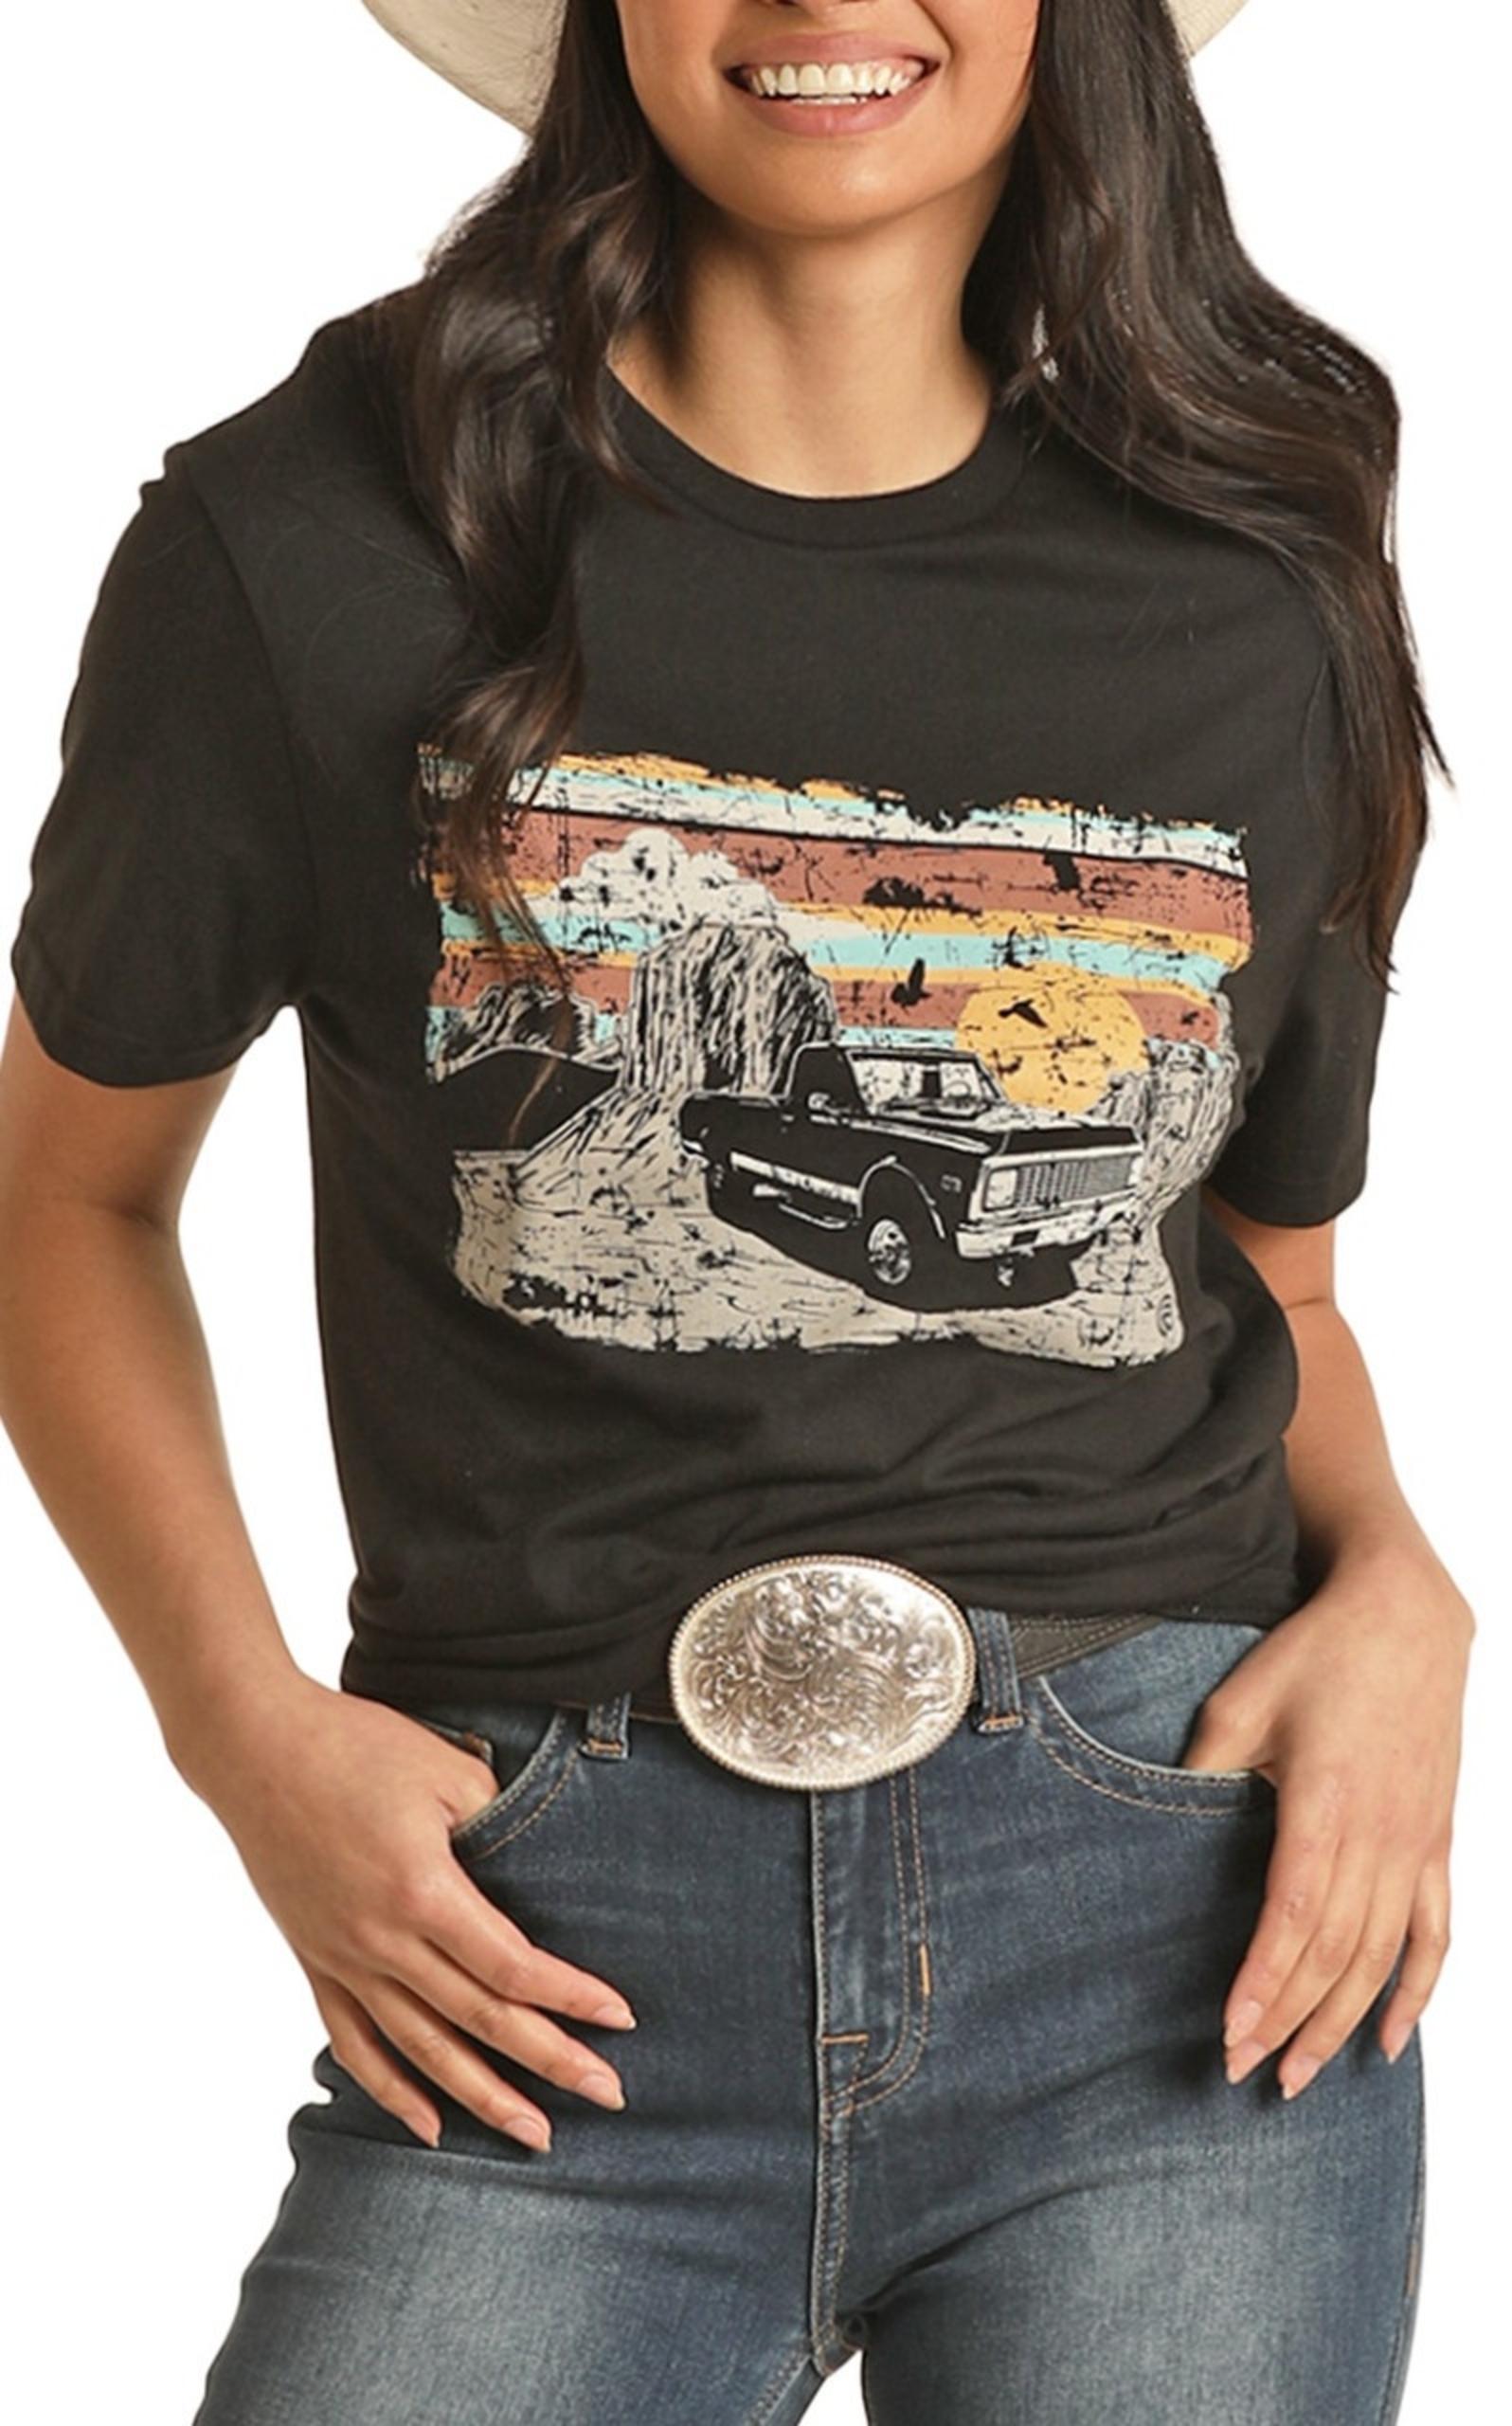 Women's Black Car and Desert Graphic Tee front